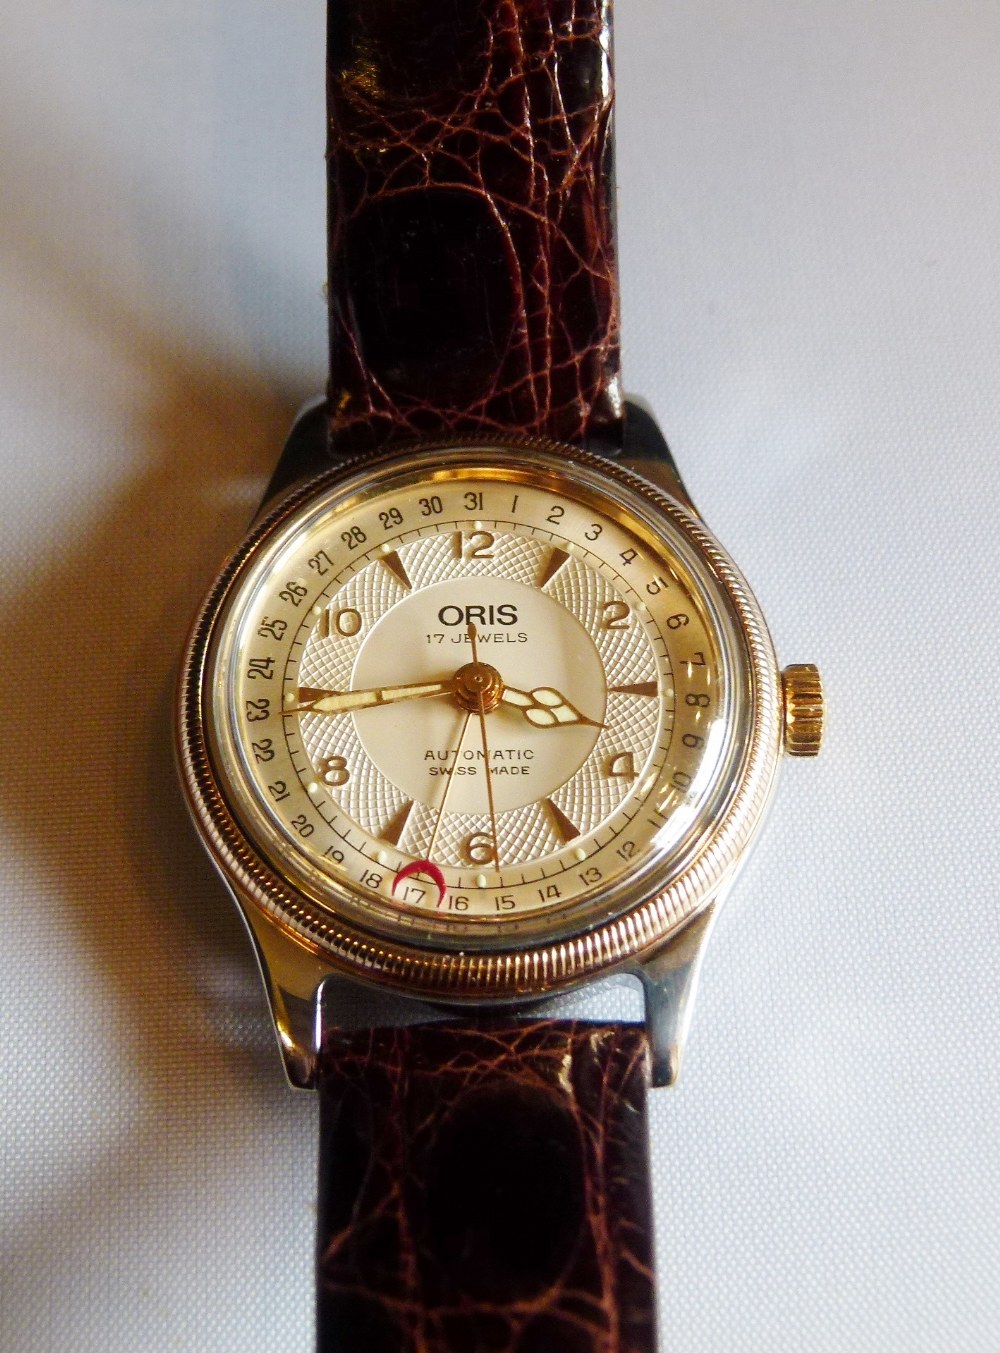 Gents Oris Automatic wristwatch with case and papers (PC20)